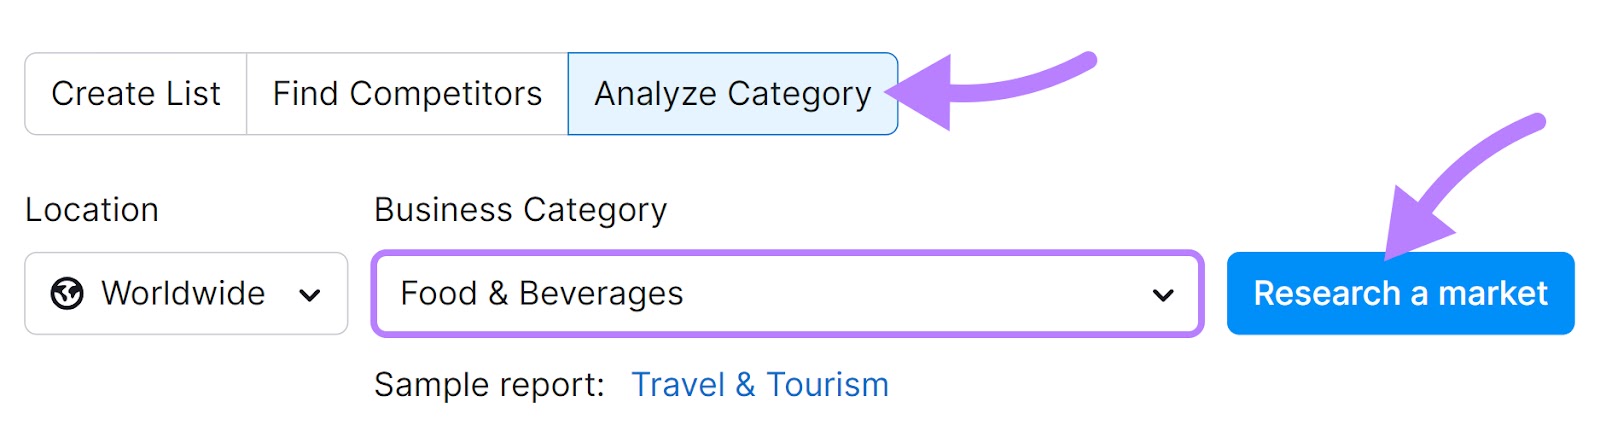 Market Explorer tool search for “Food and Beverages” category